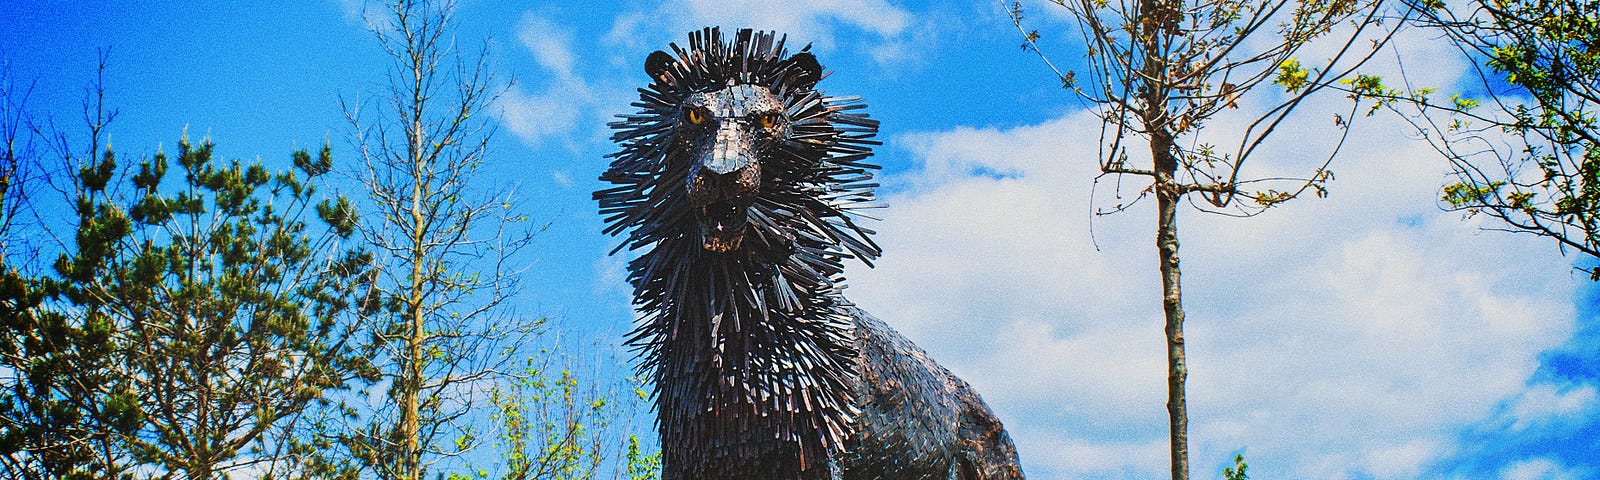 Statue of lion with mane like porcupine quills